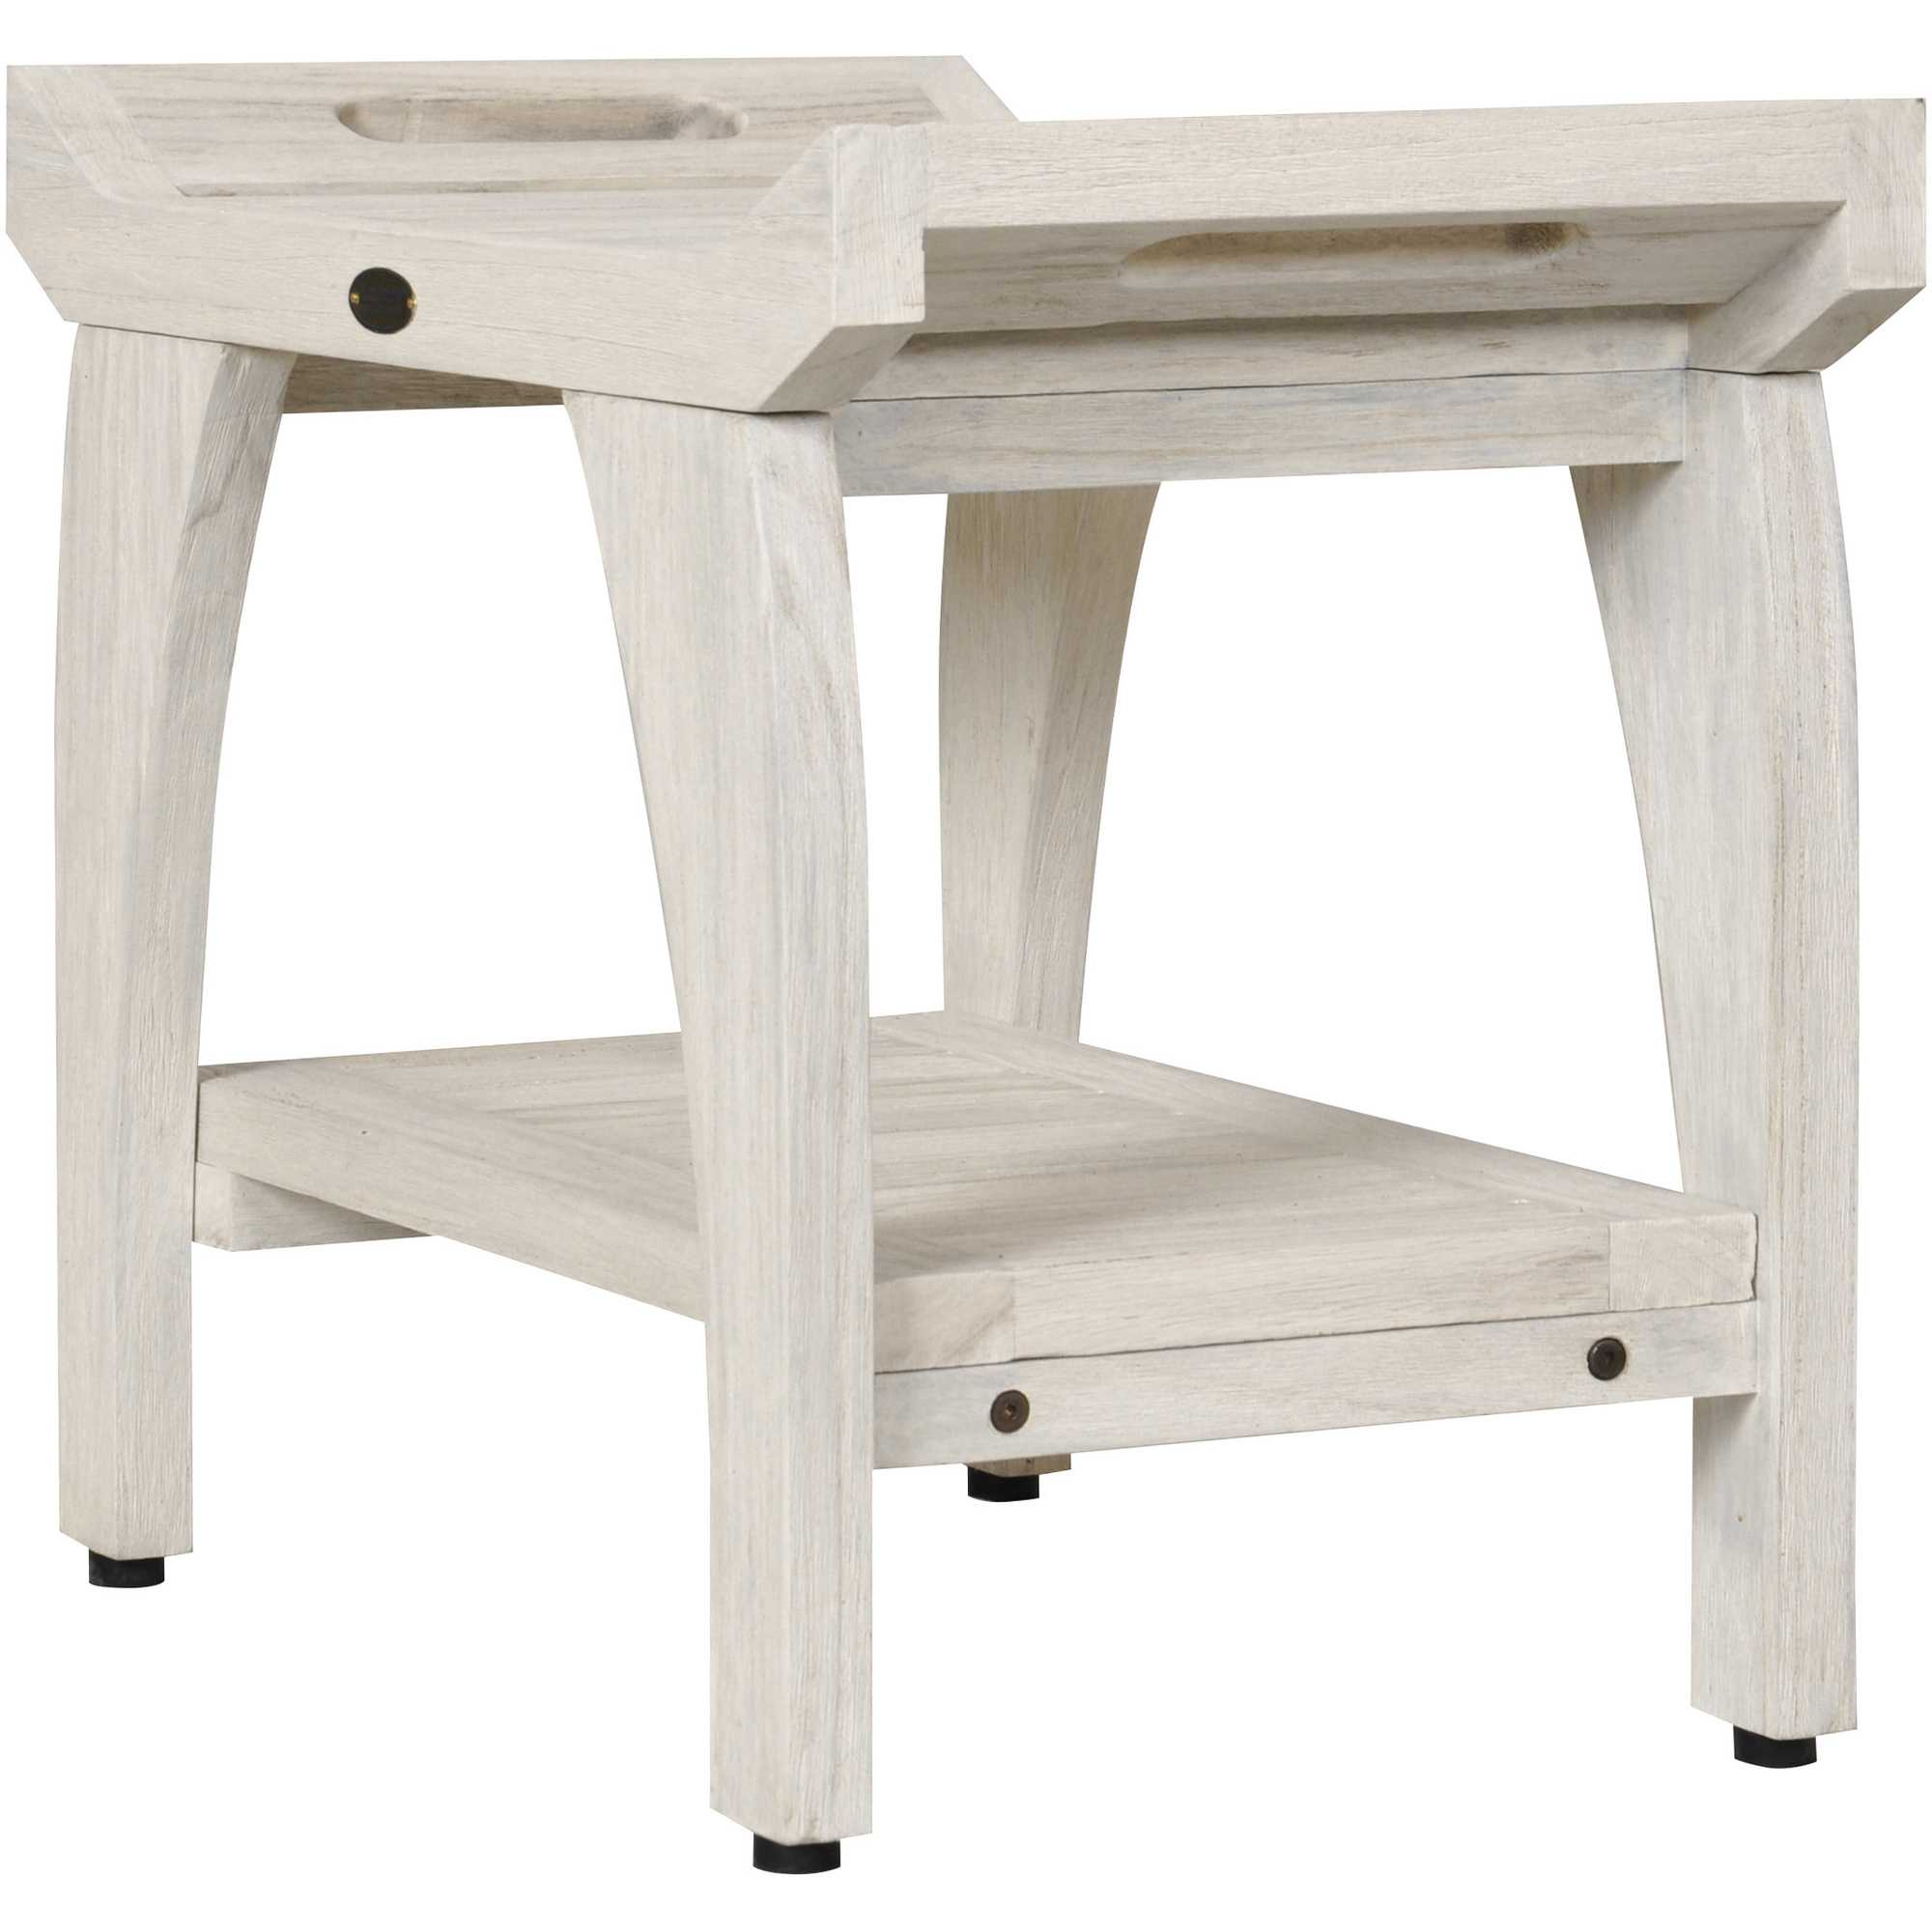 Compact Teak Shower Stool with Shelf and Handles in White Finish